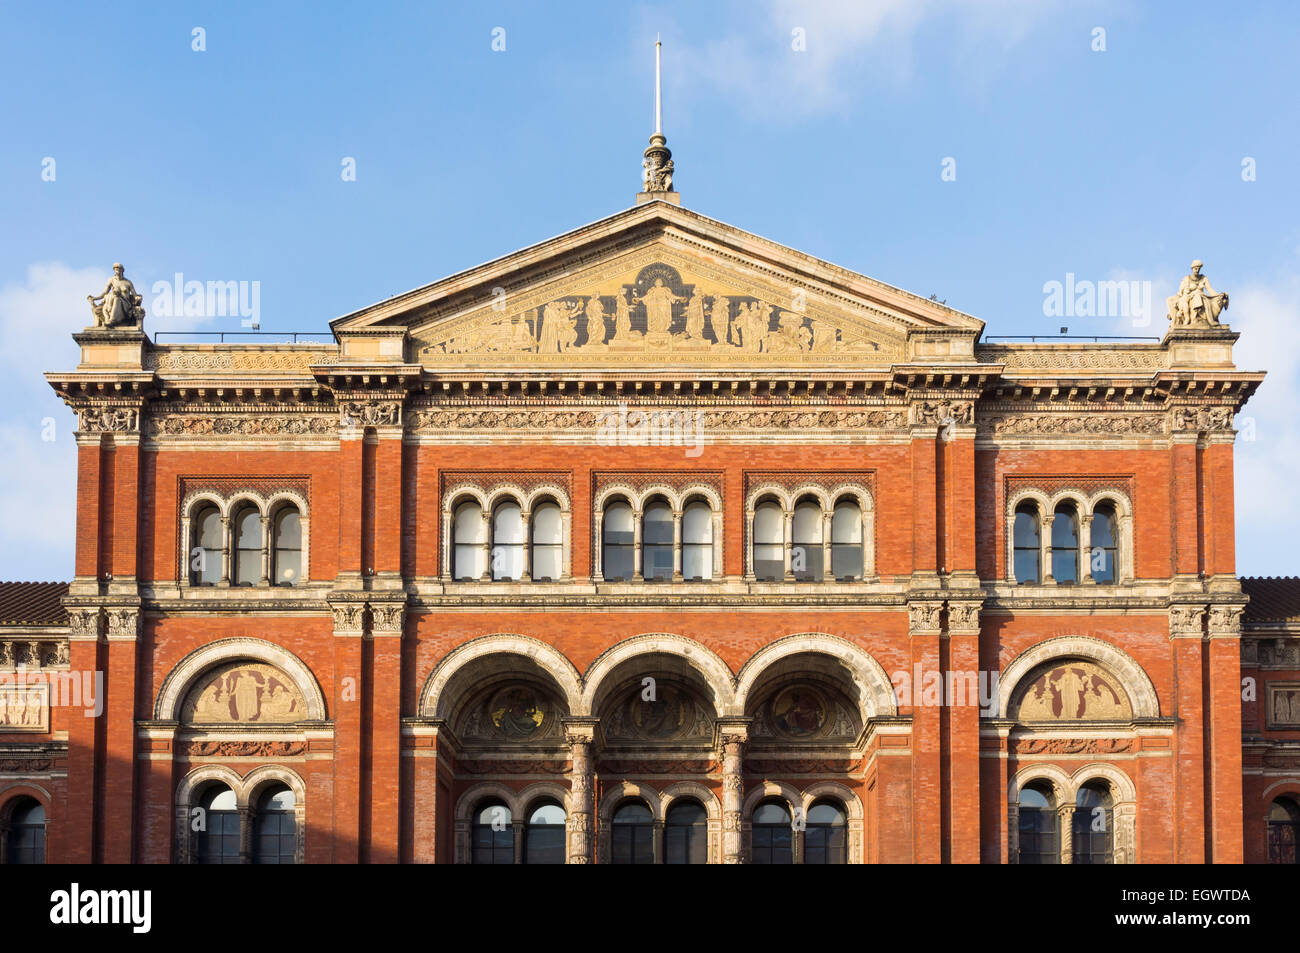 Victoria and Albert museum, V&A, London, England, UK Stock Photo